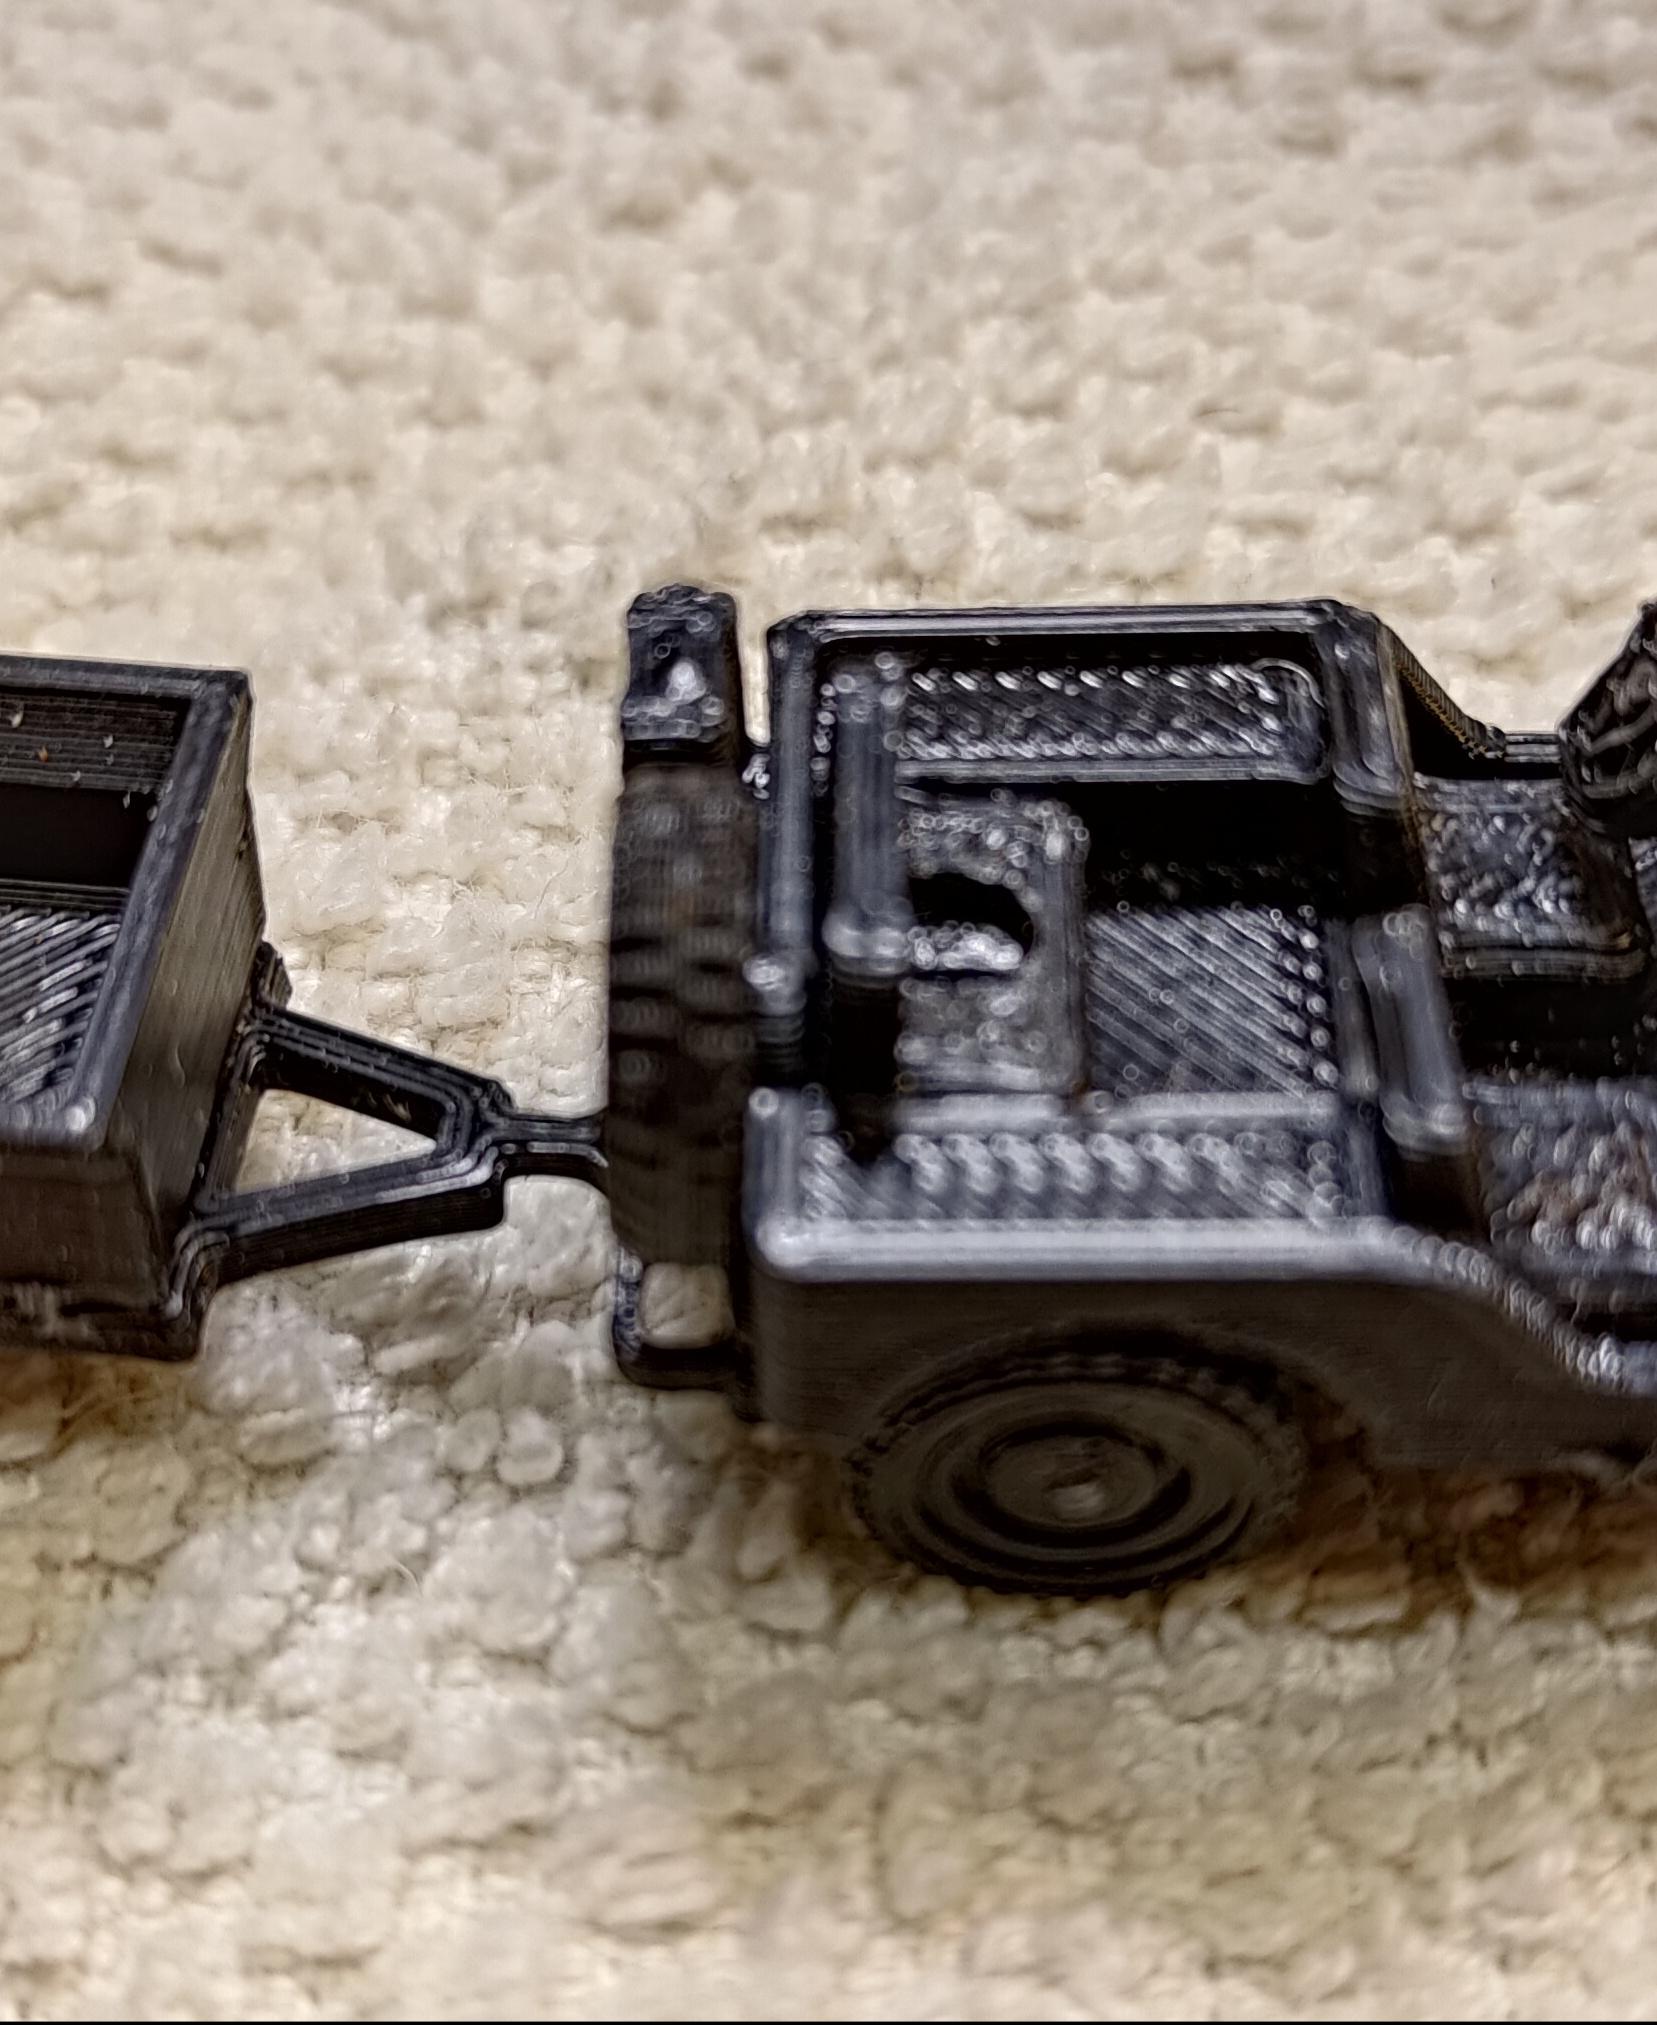 Jeep Kit Card - Awesome build.  A bit small scale for my big old fingers but got through it.  Had one part left over - viewed build video but didn't see it.  The designer is a genius to get it all to print flat with no supports. - 3d model